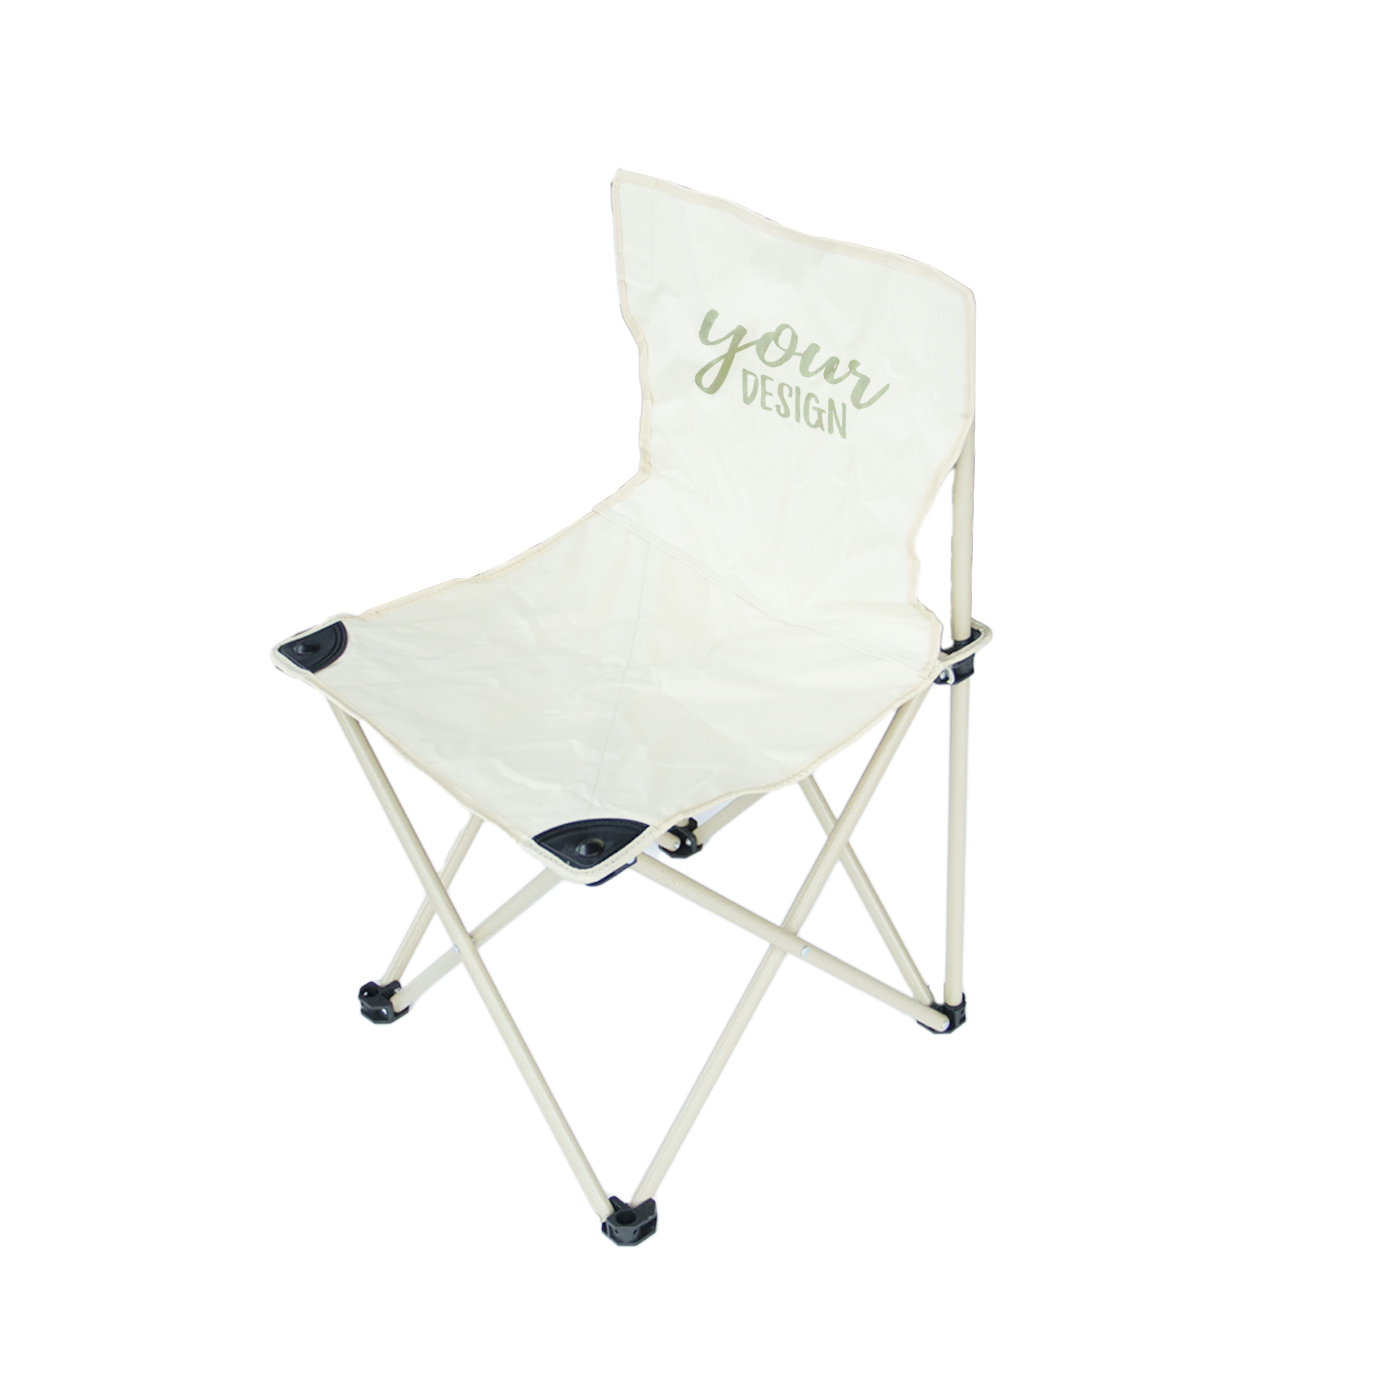 Outdoor Folding Chair With Carrying Bag1